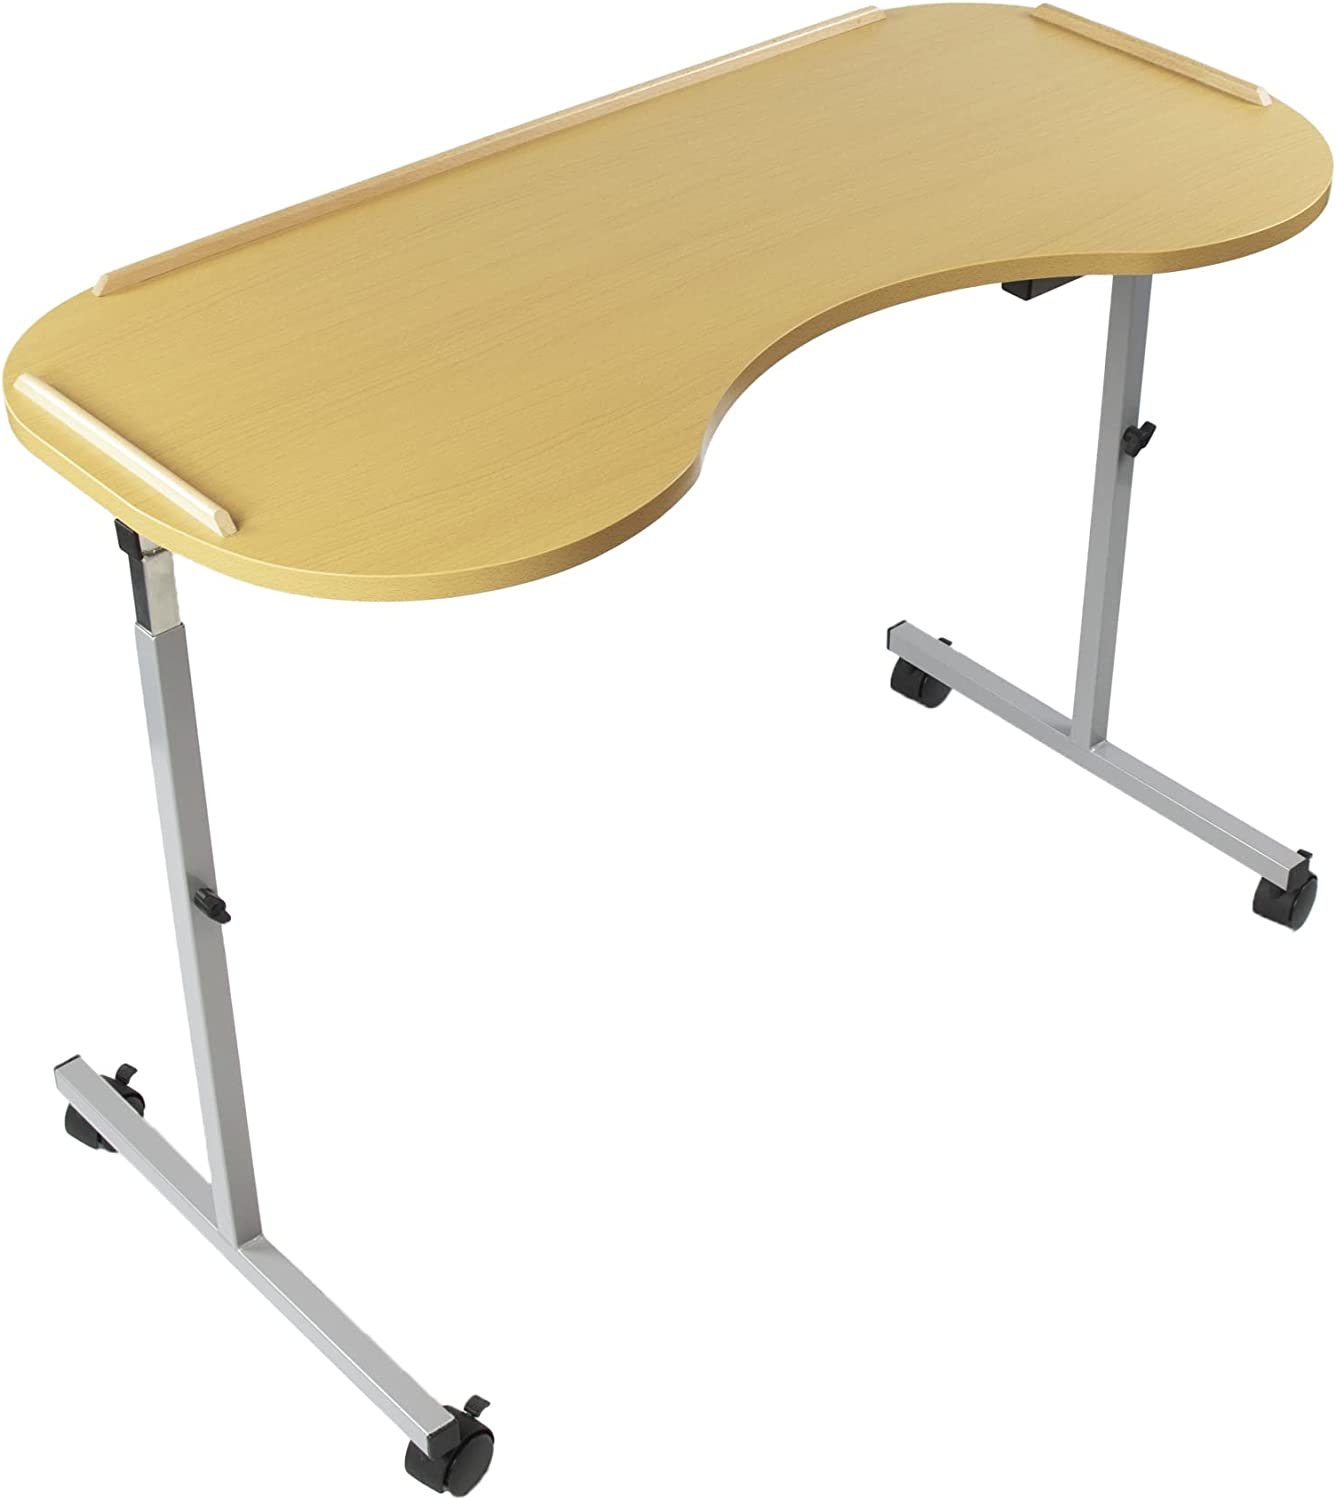 NRS Healthcare Adjustable Curved Over BedChair Table